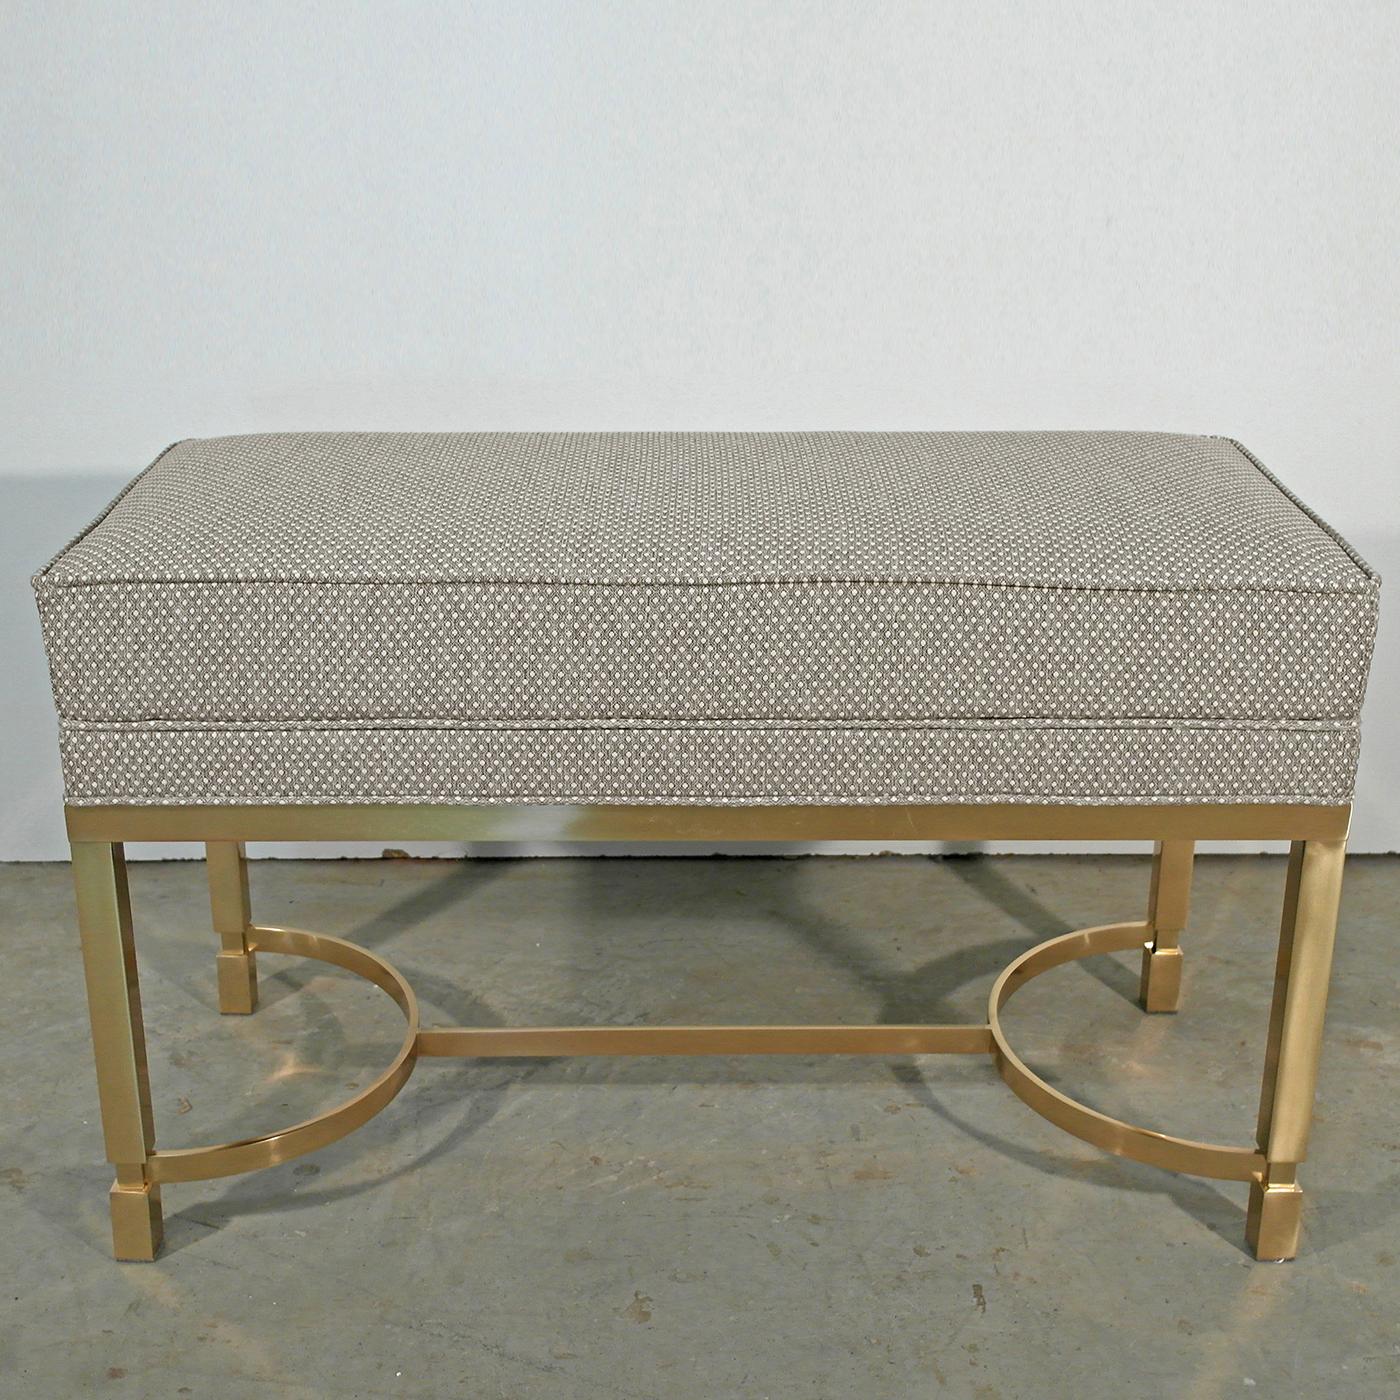 This elegant bench boasts a brass base with a polished finish, characterized by semi-circular details for a modern look. Its padded seat is upholstered in soft fabric with a subtle two-tone motif. With its sleek lines and muted hues, the two-tone